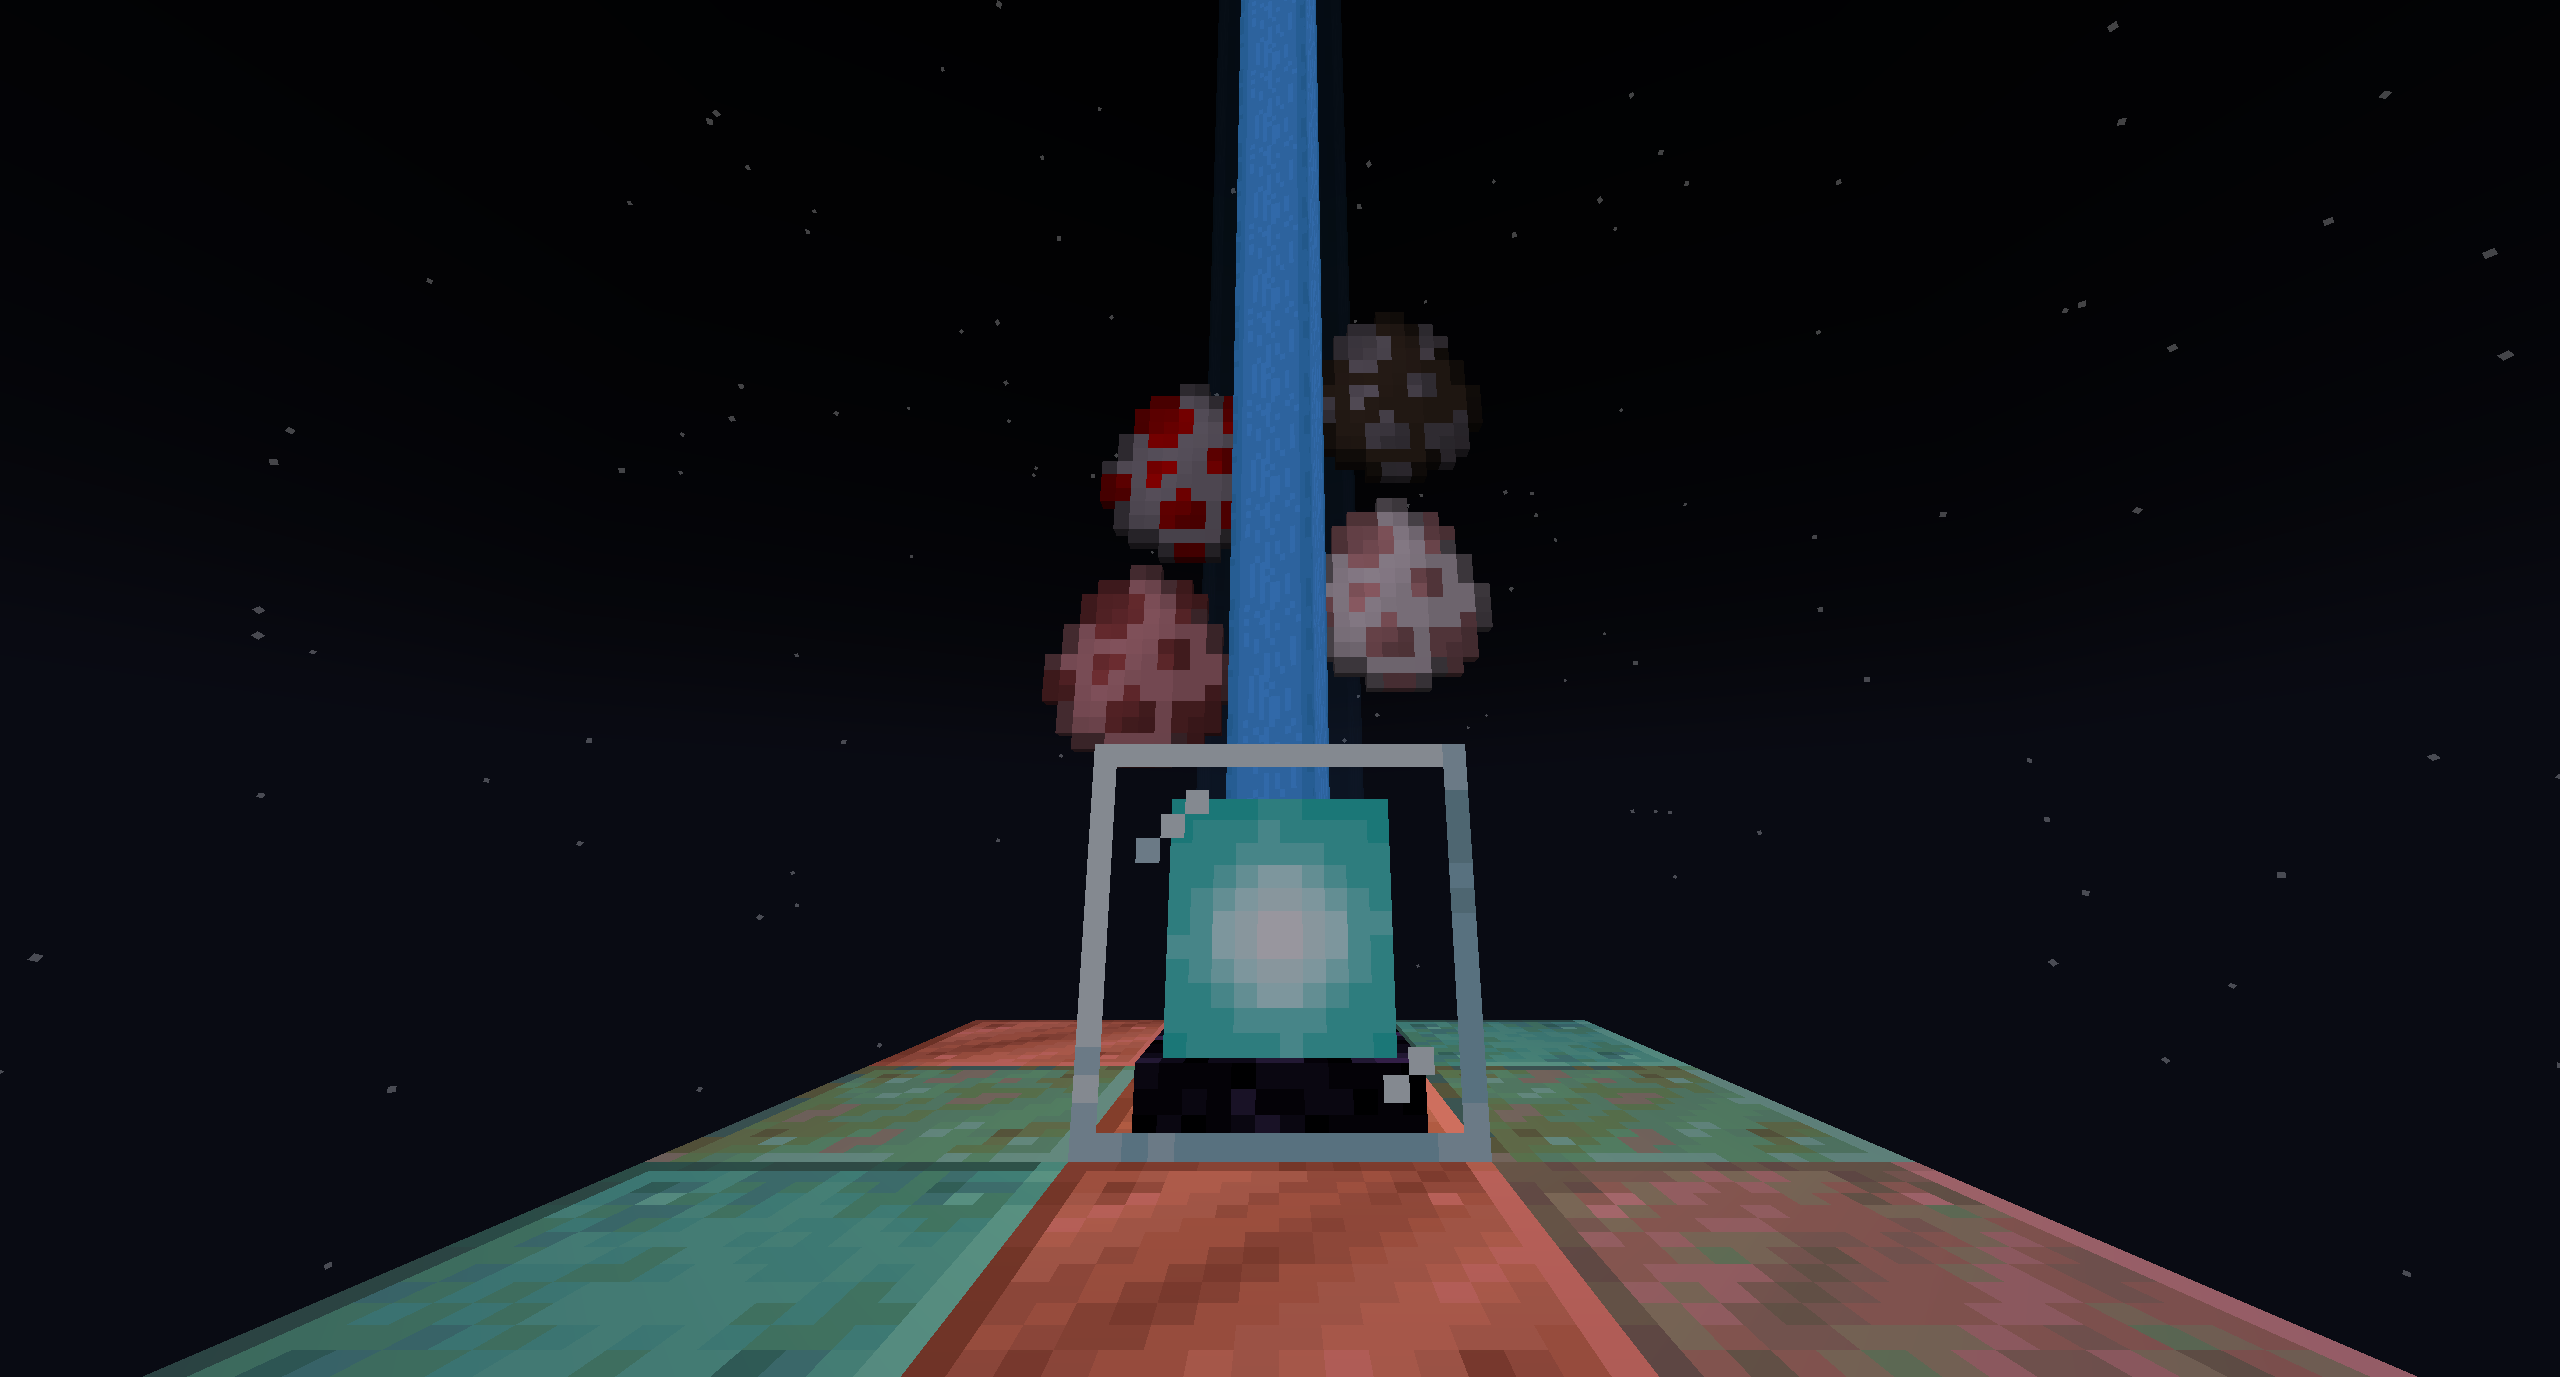 Note that this datapack doesn't affect the beam itself or.. spawn eggs, just some handy display-entity work